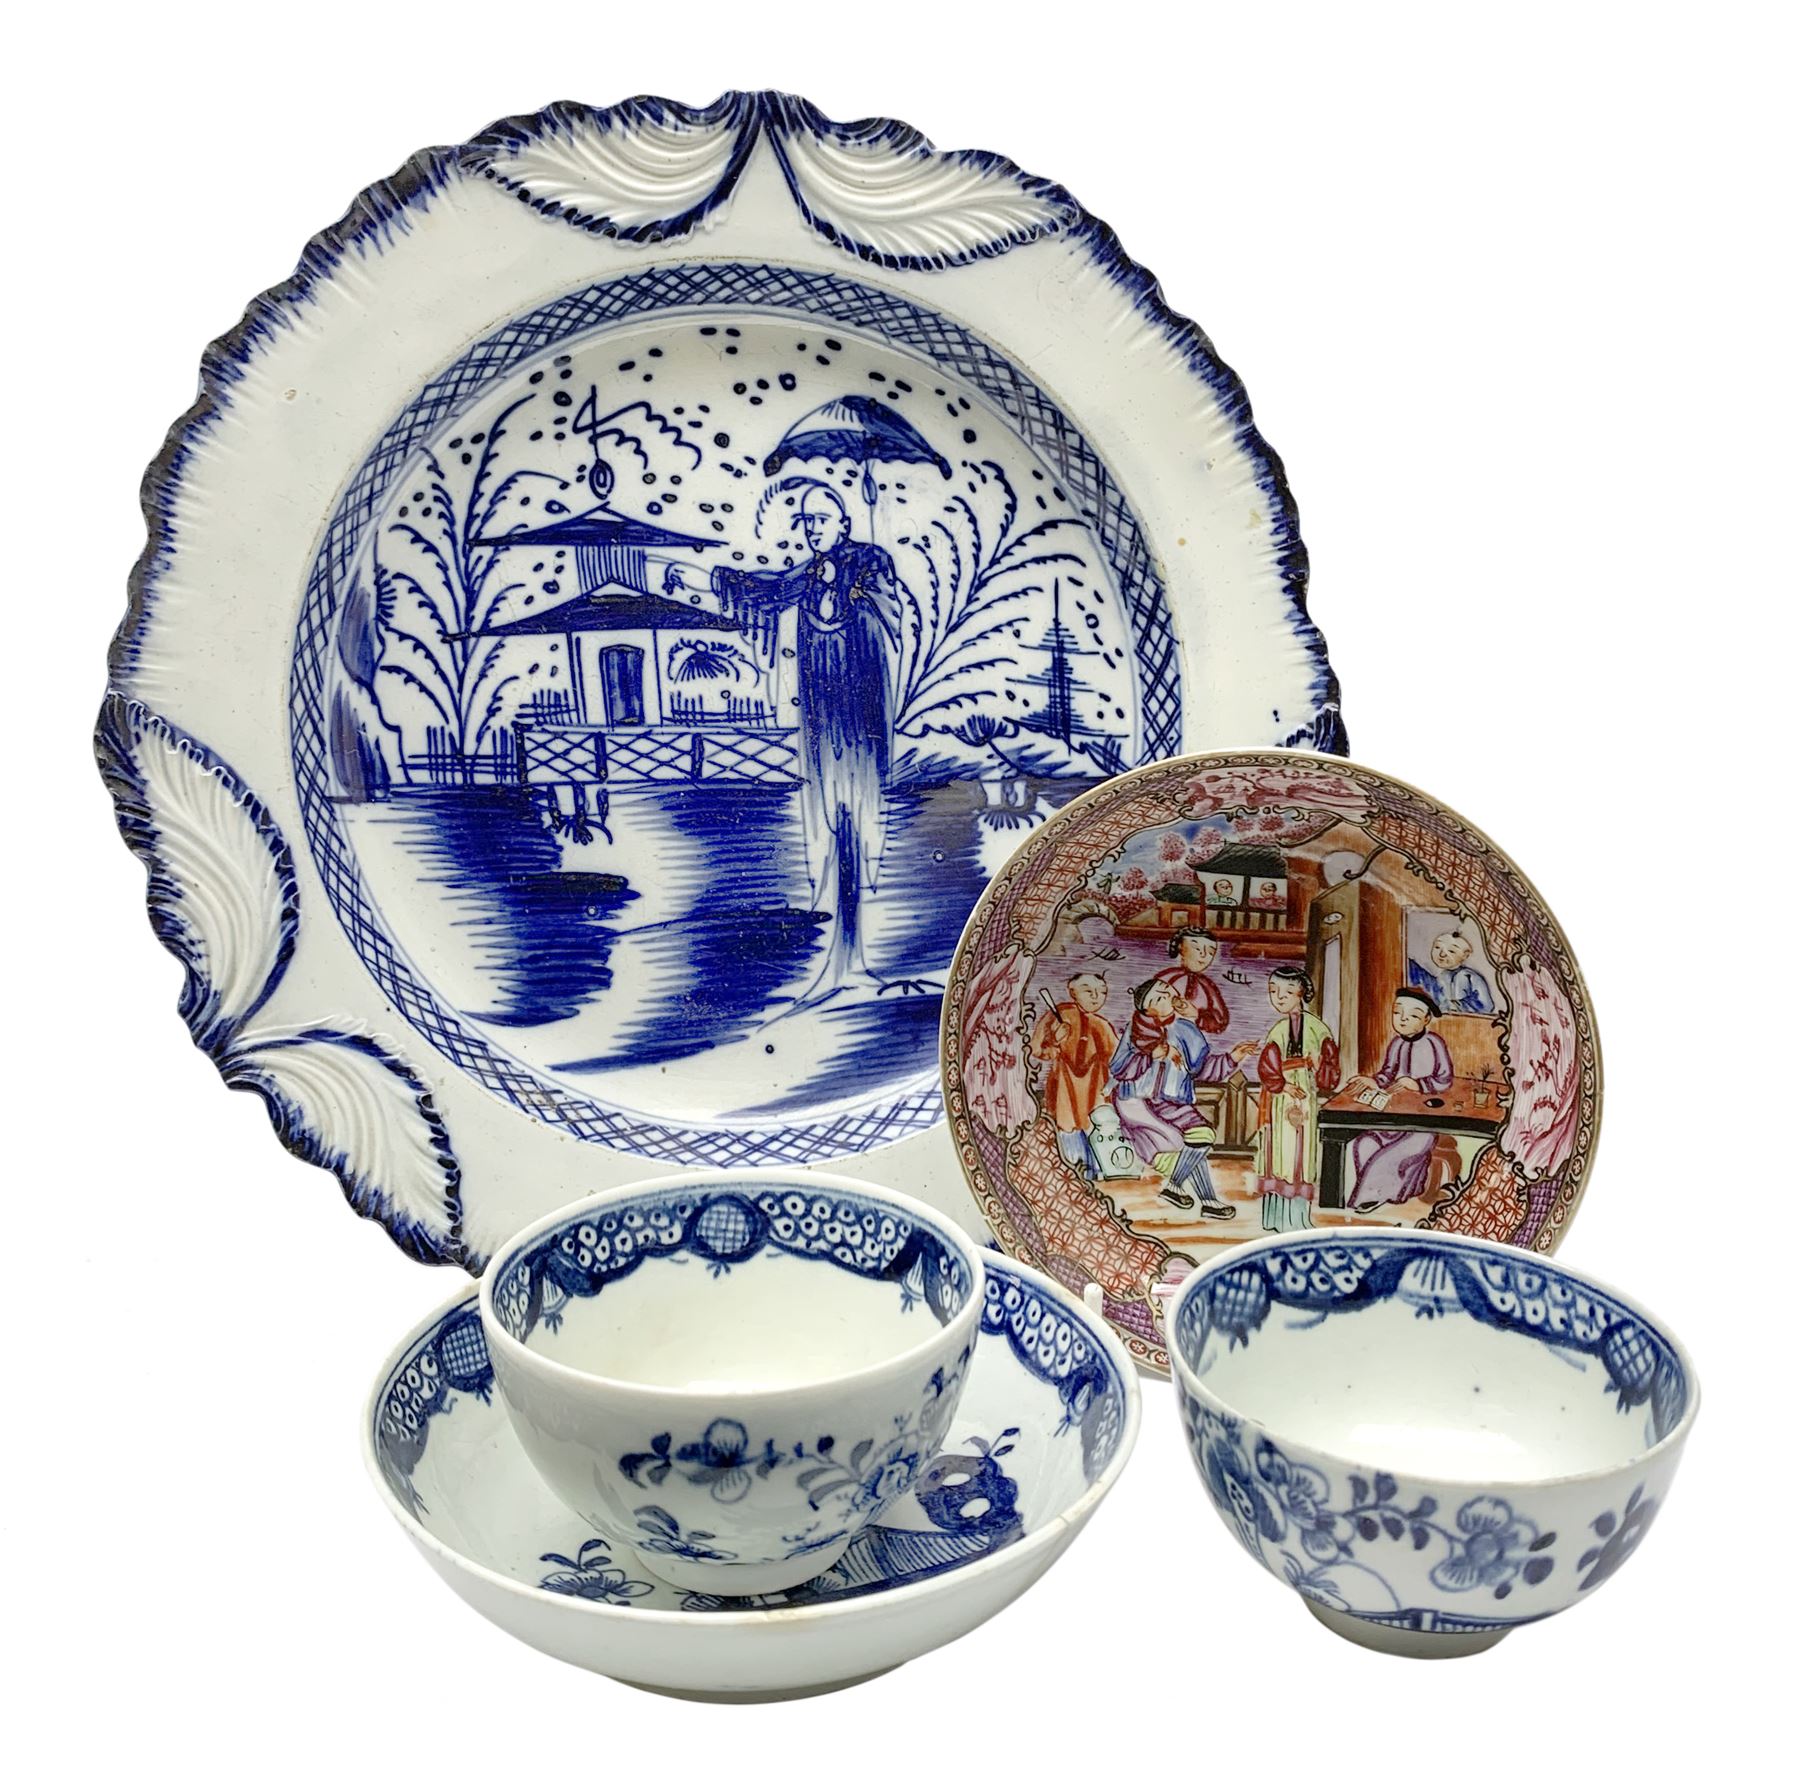 Late 18th century blue and white pearlware plate